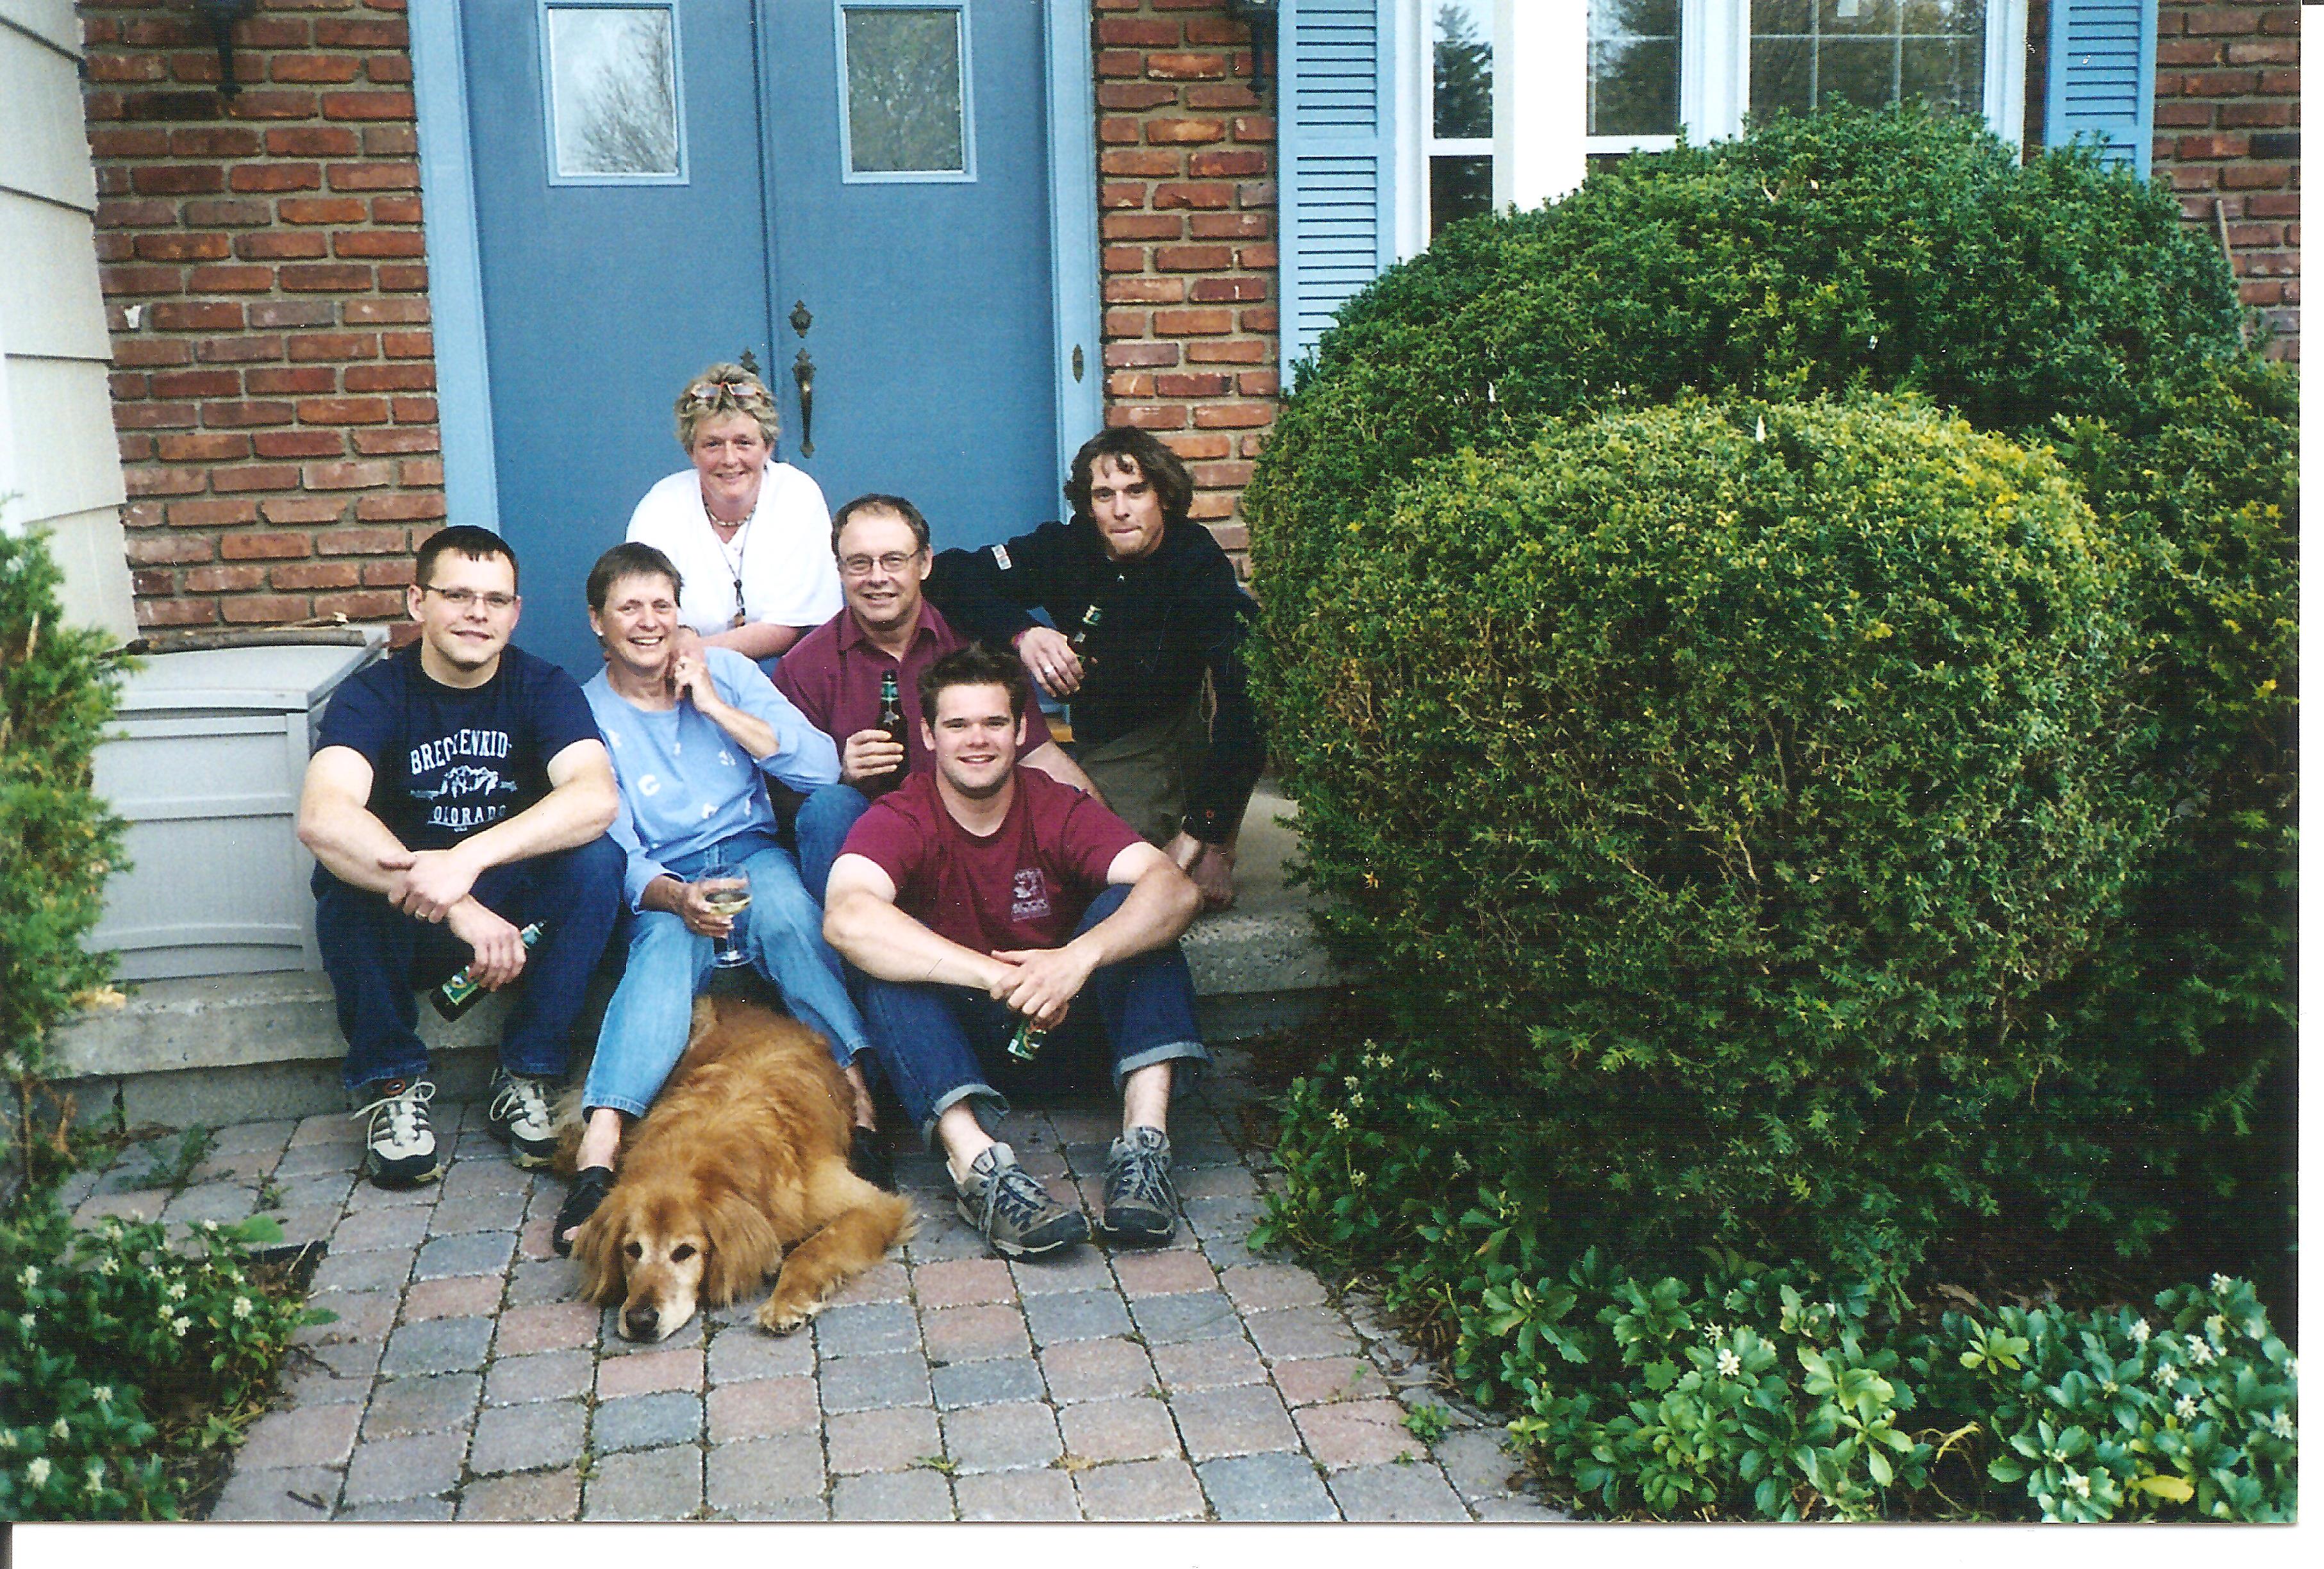 Timothy and his family with their dog on the porch steps.